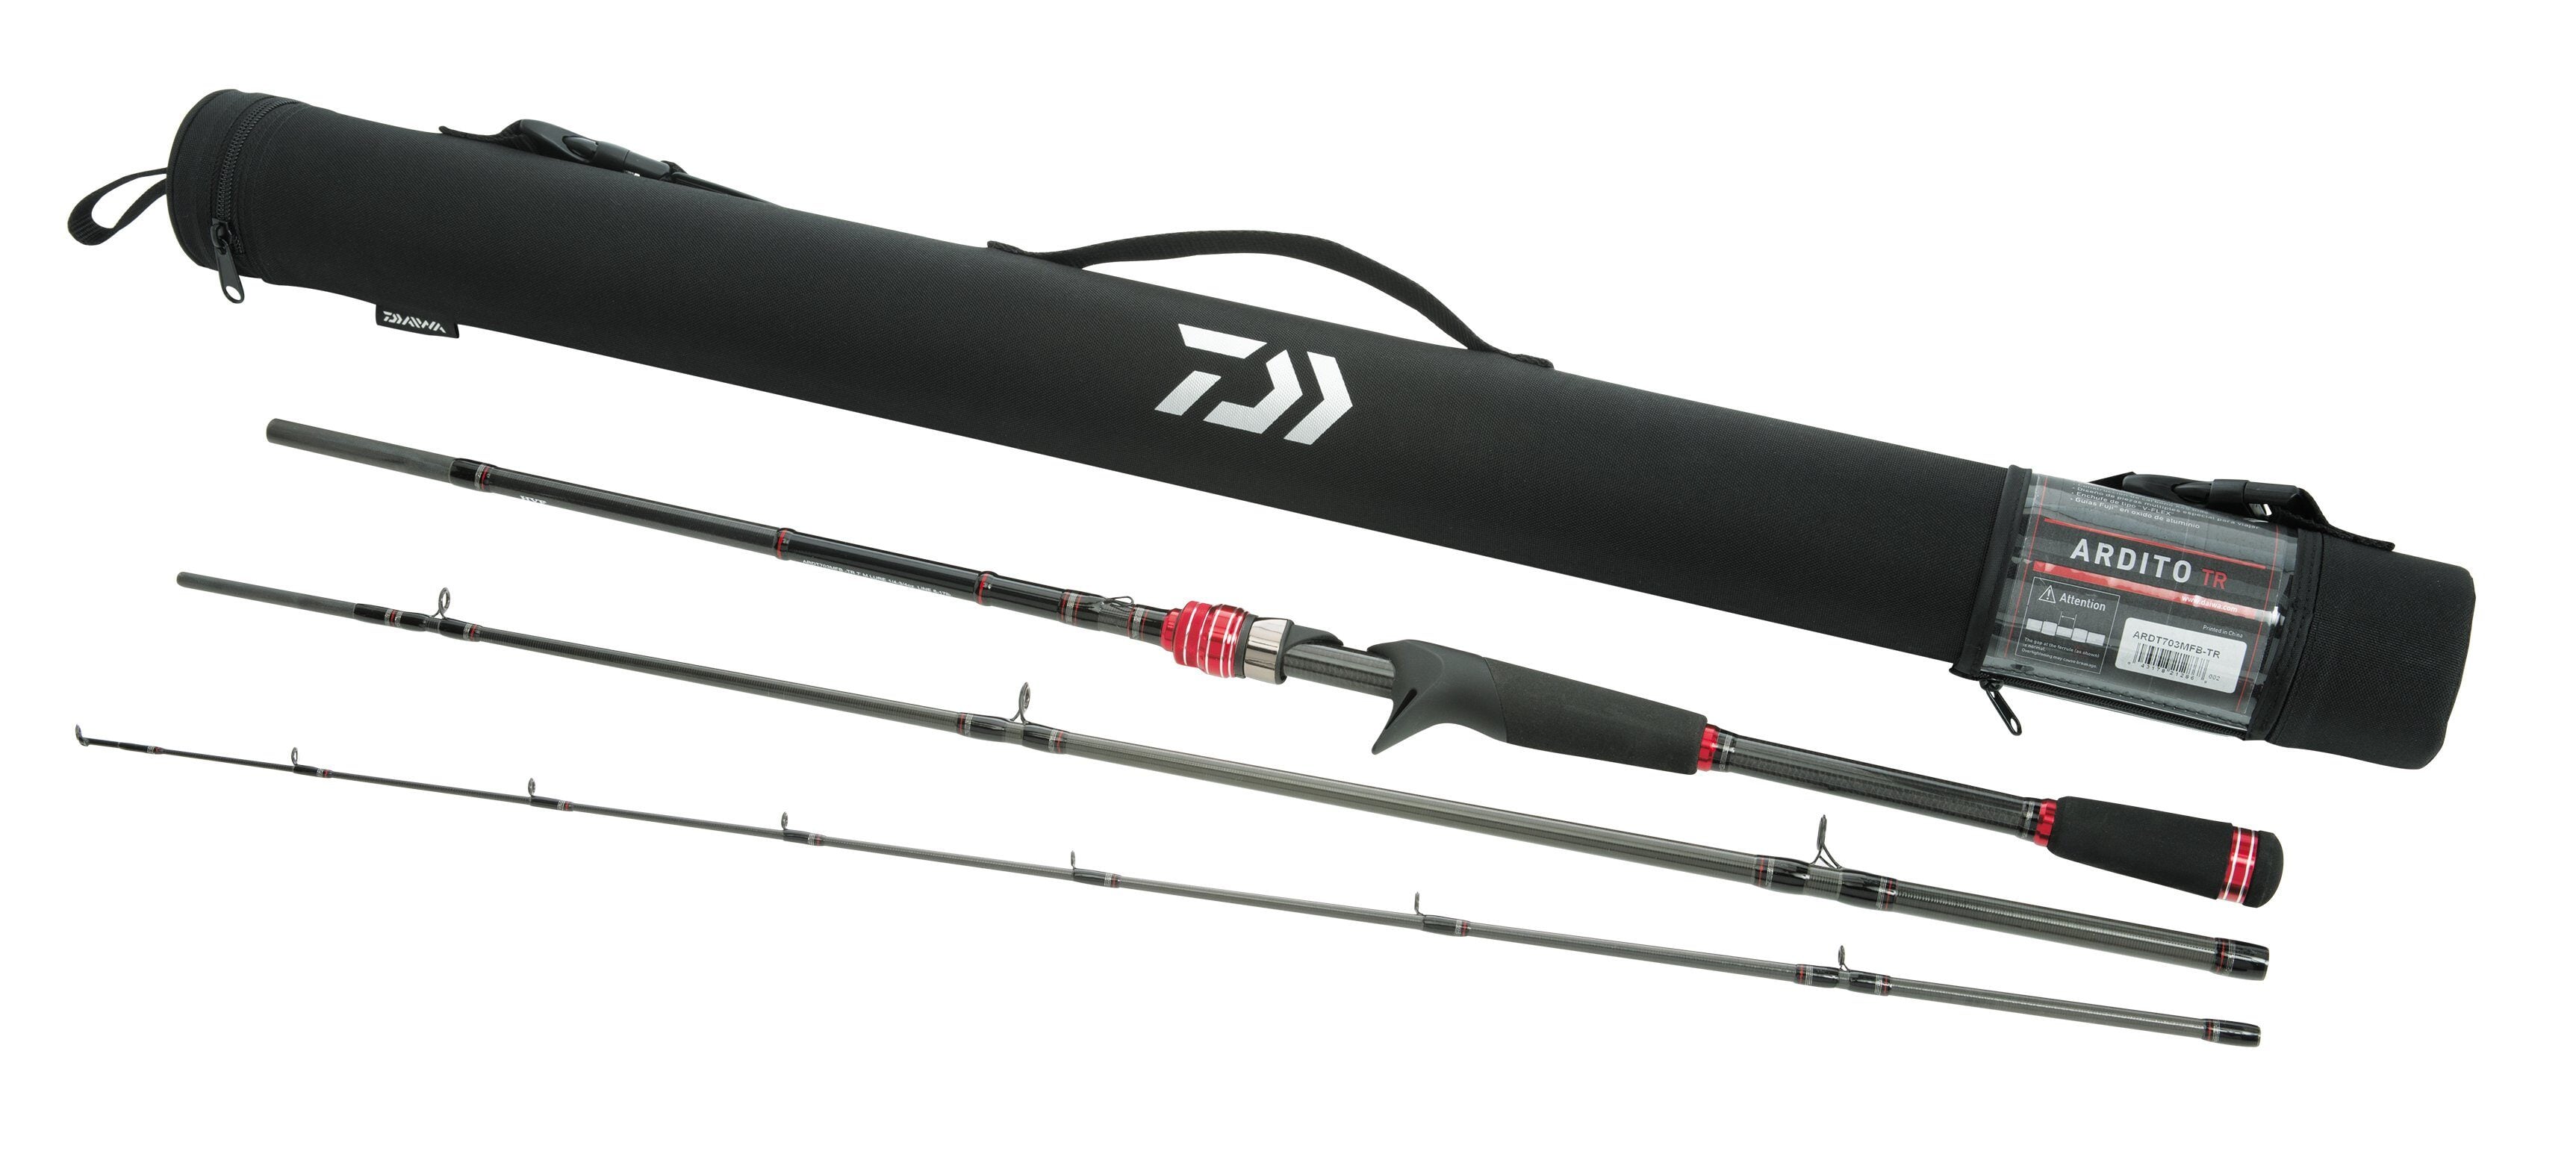 Daiwa Ardito TR Travel Spinning Rod and Case